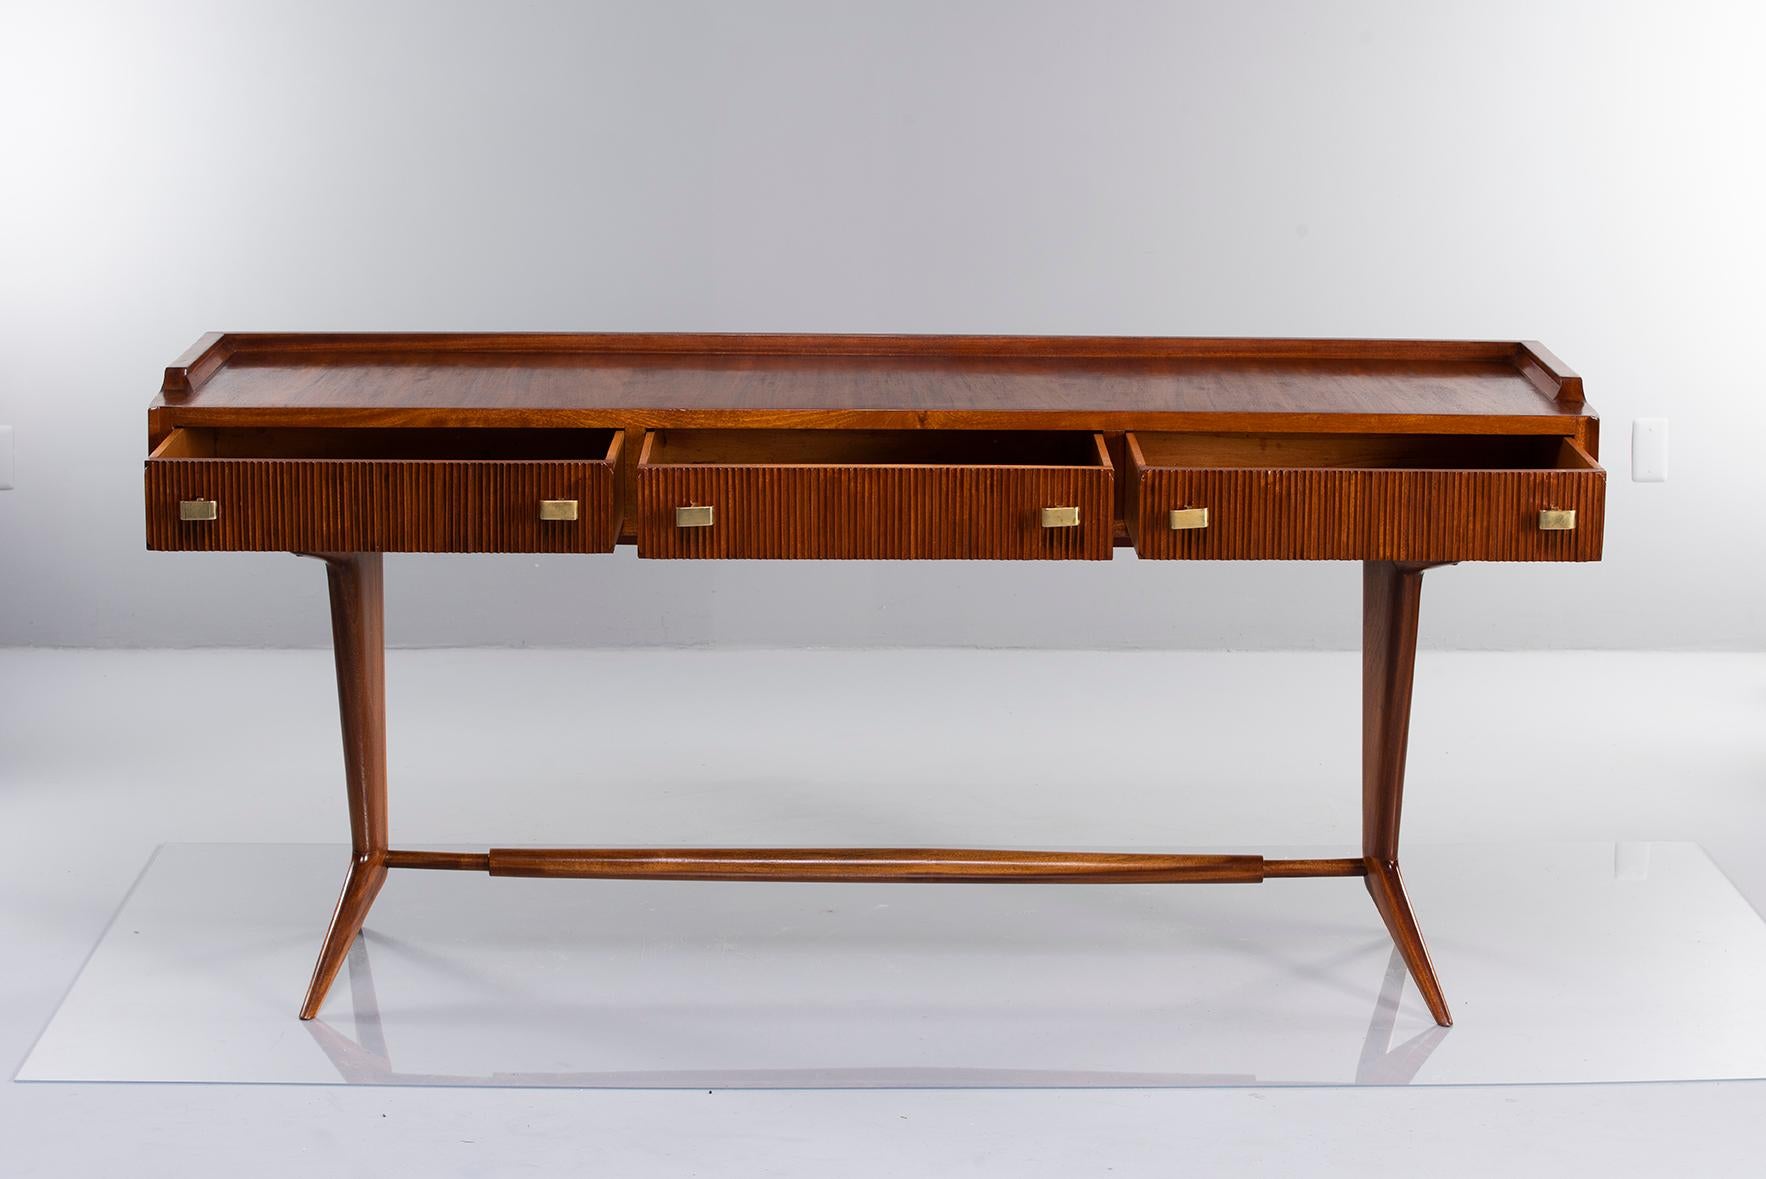 Italian desk with three shallow functional drawers, circa early 1960s. Unknown wood species. Drawers have dove tail construction with ridged fronts and brass hardware. Narrow tapered splayed legs with turned stretcher.